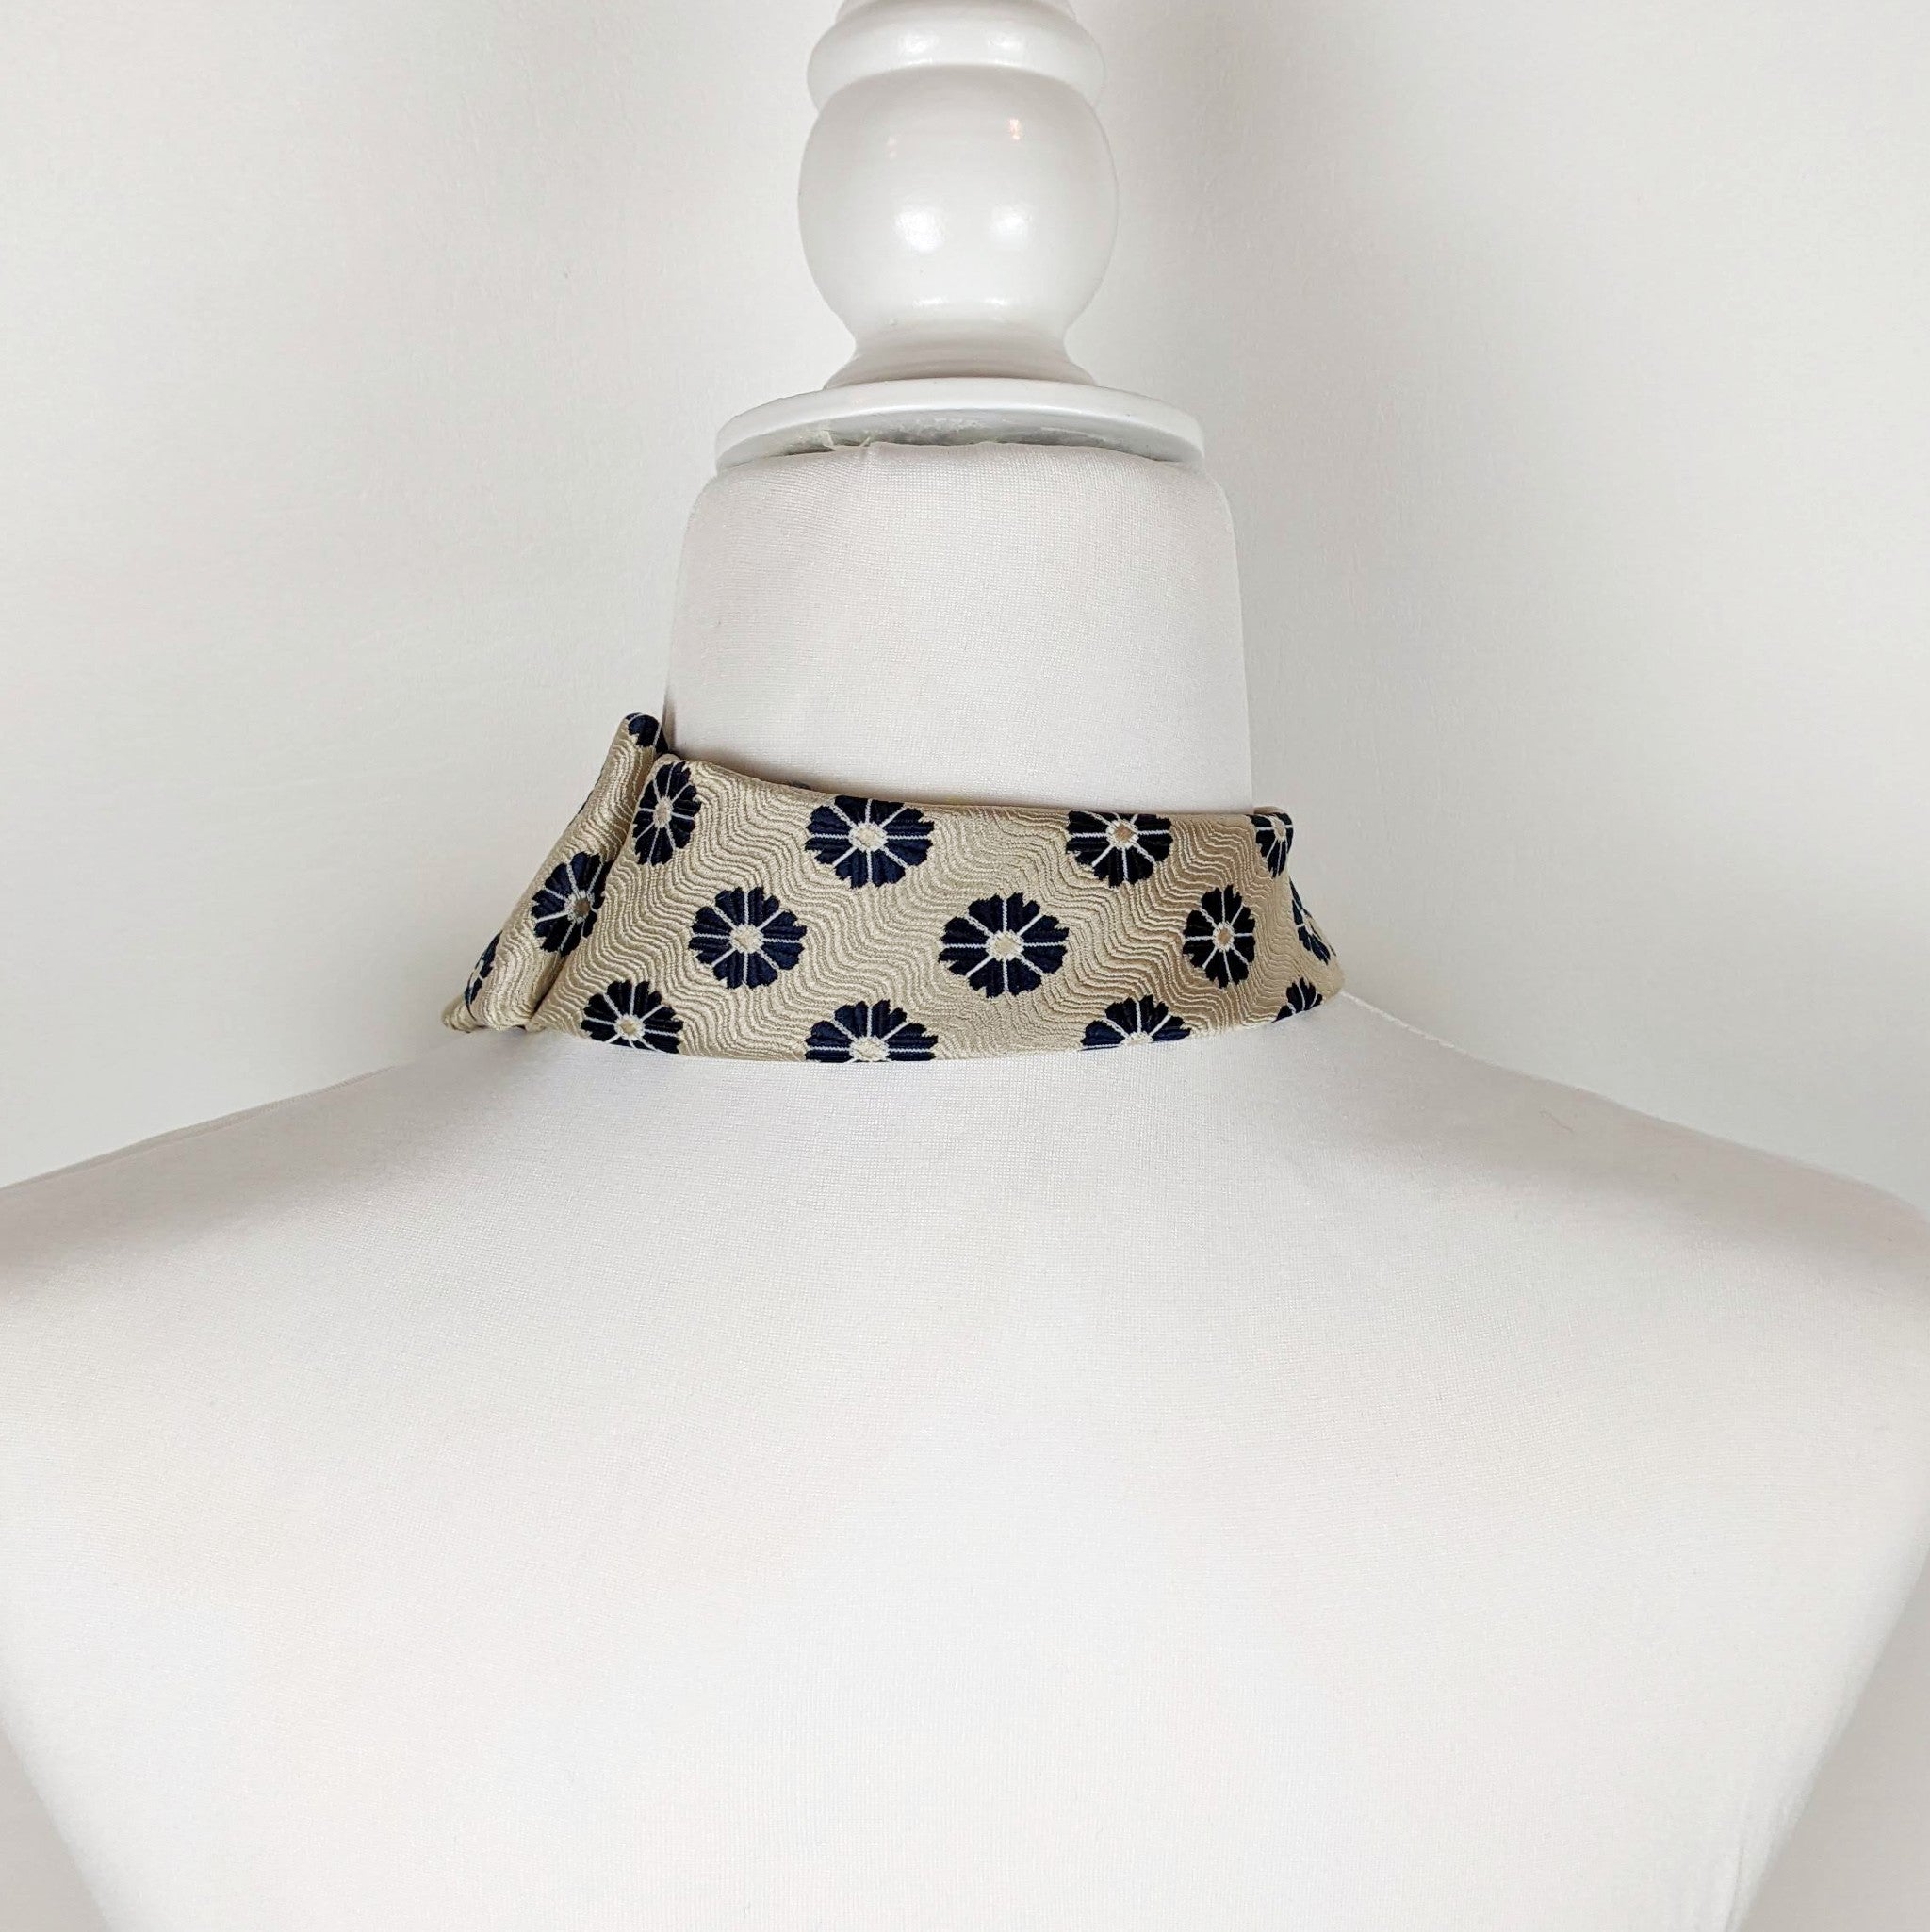 Ascot Scarf In Sand and Navy Flowers and Pixies Print